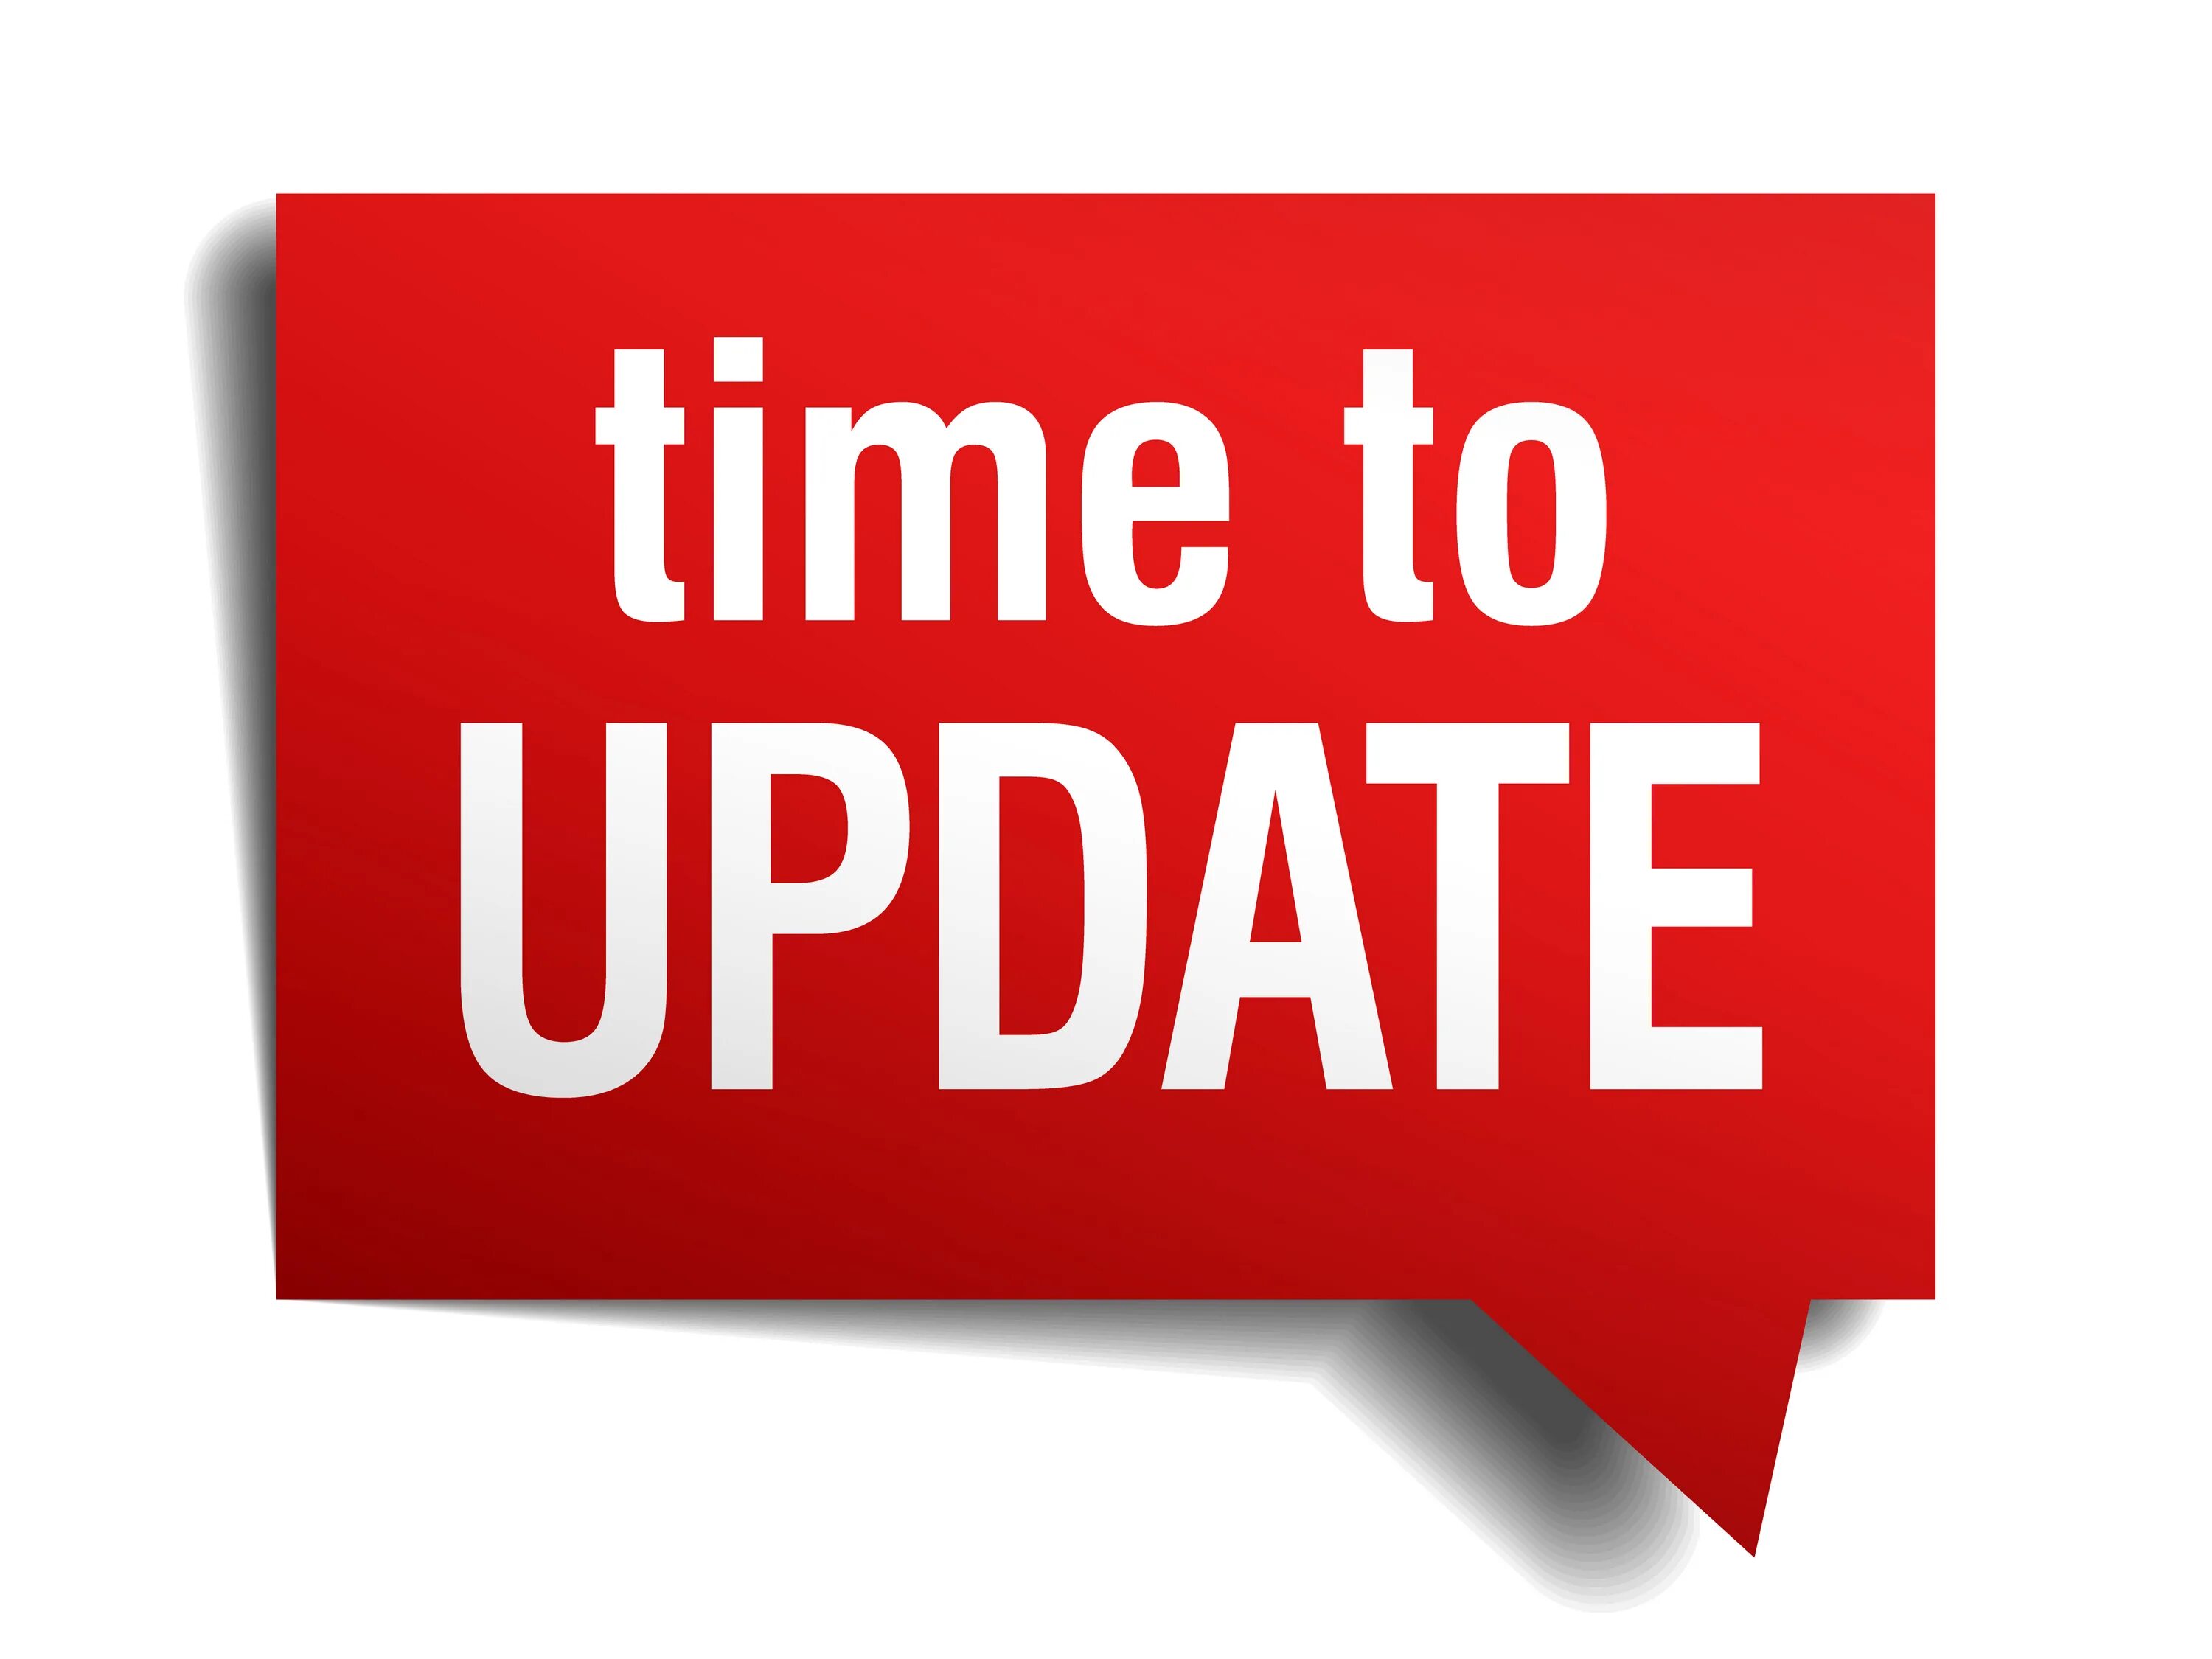 Time to update it has been. Update картинка. Time to update. Обновление вектор. Time for update.